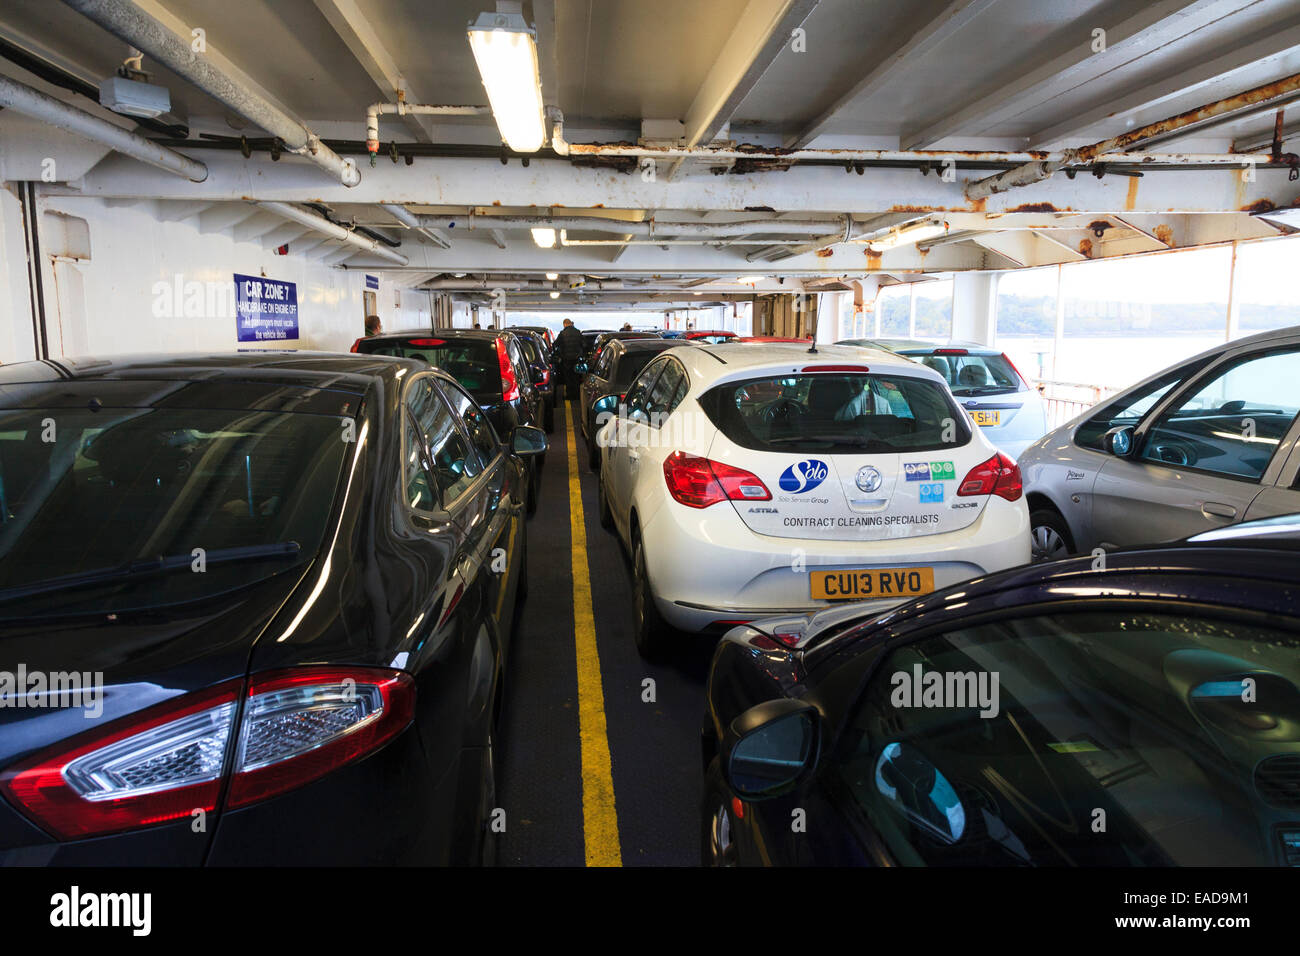 Restricted height car deck on ferry Stock Photo